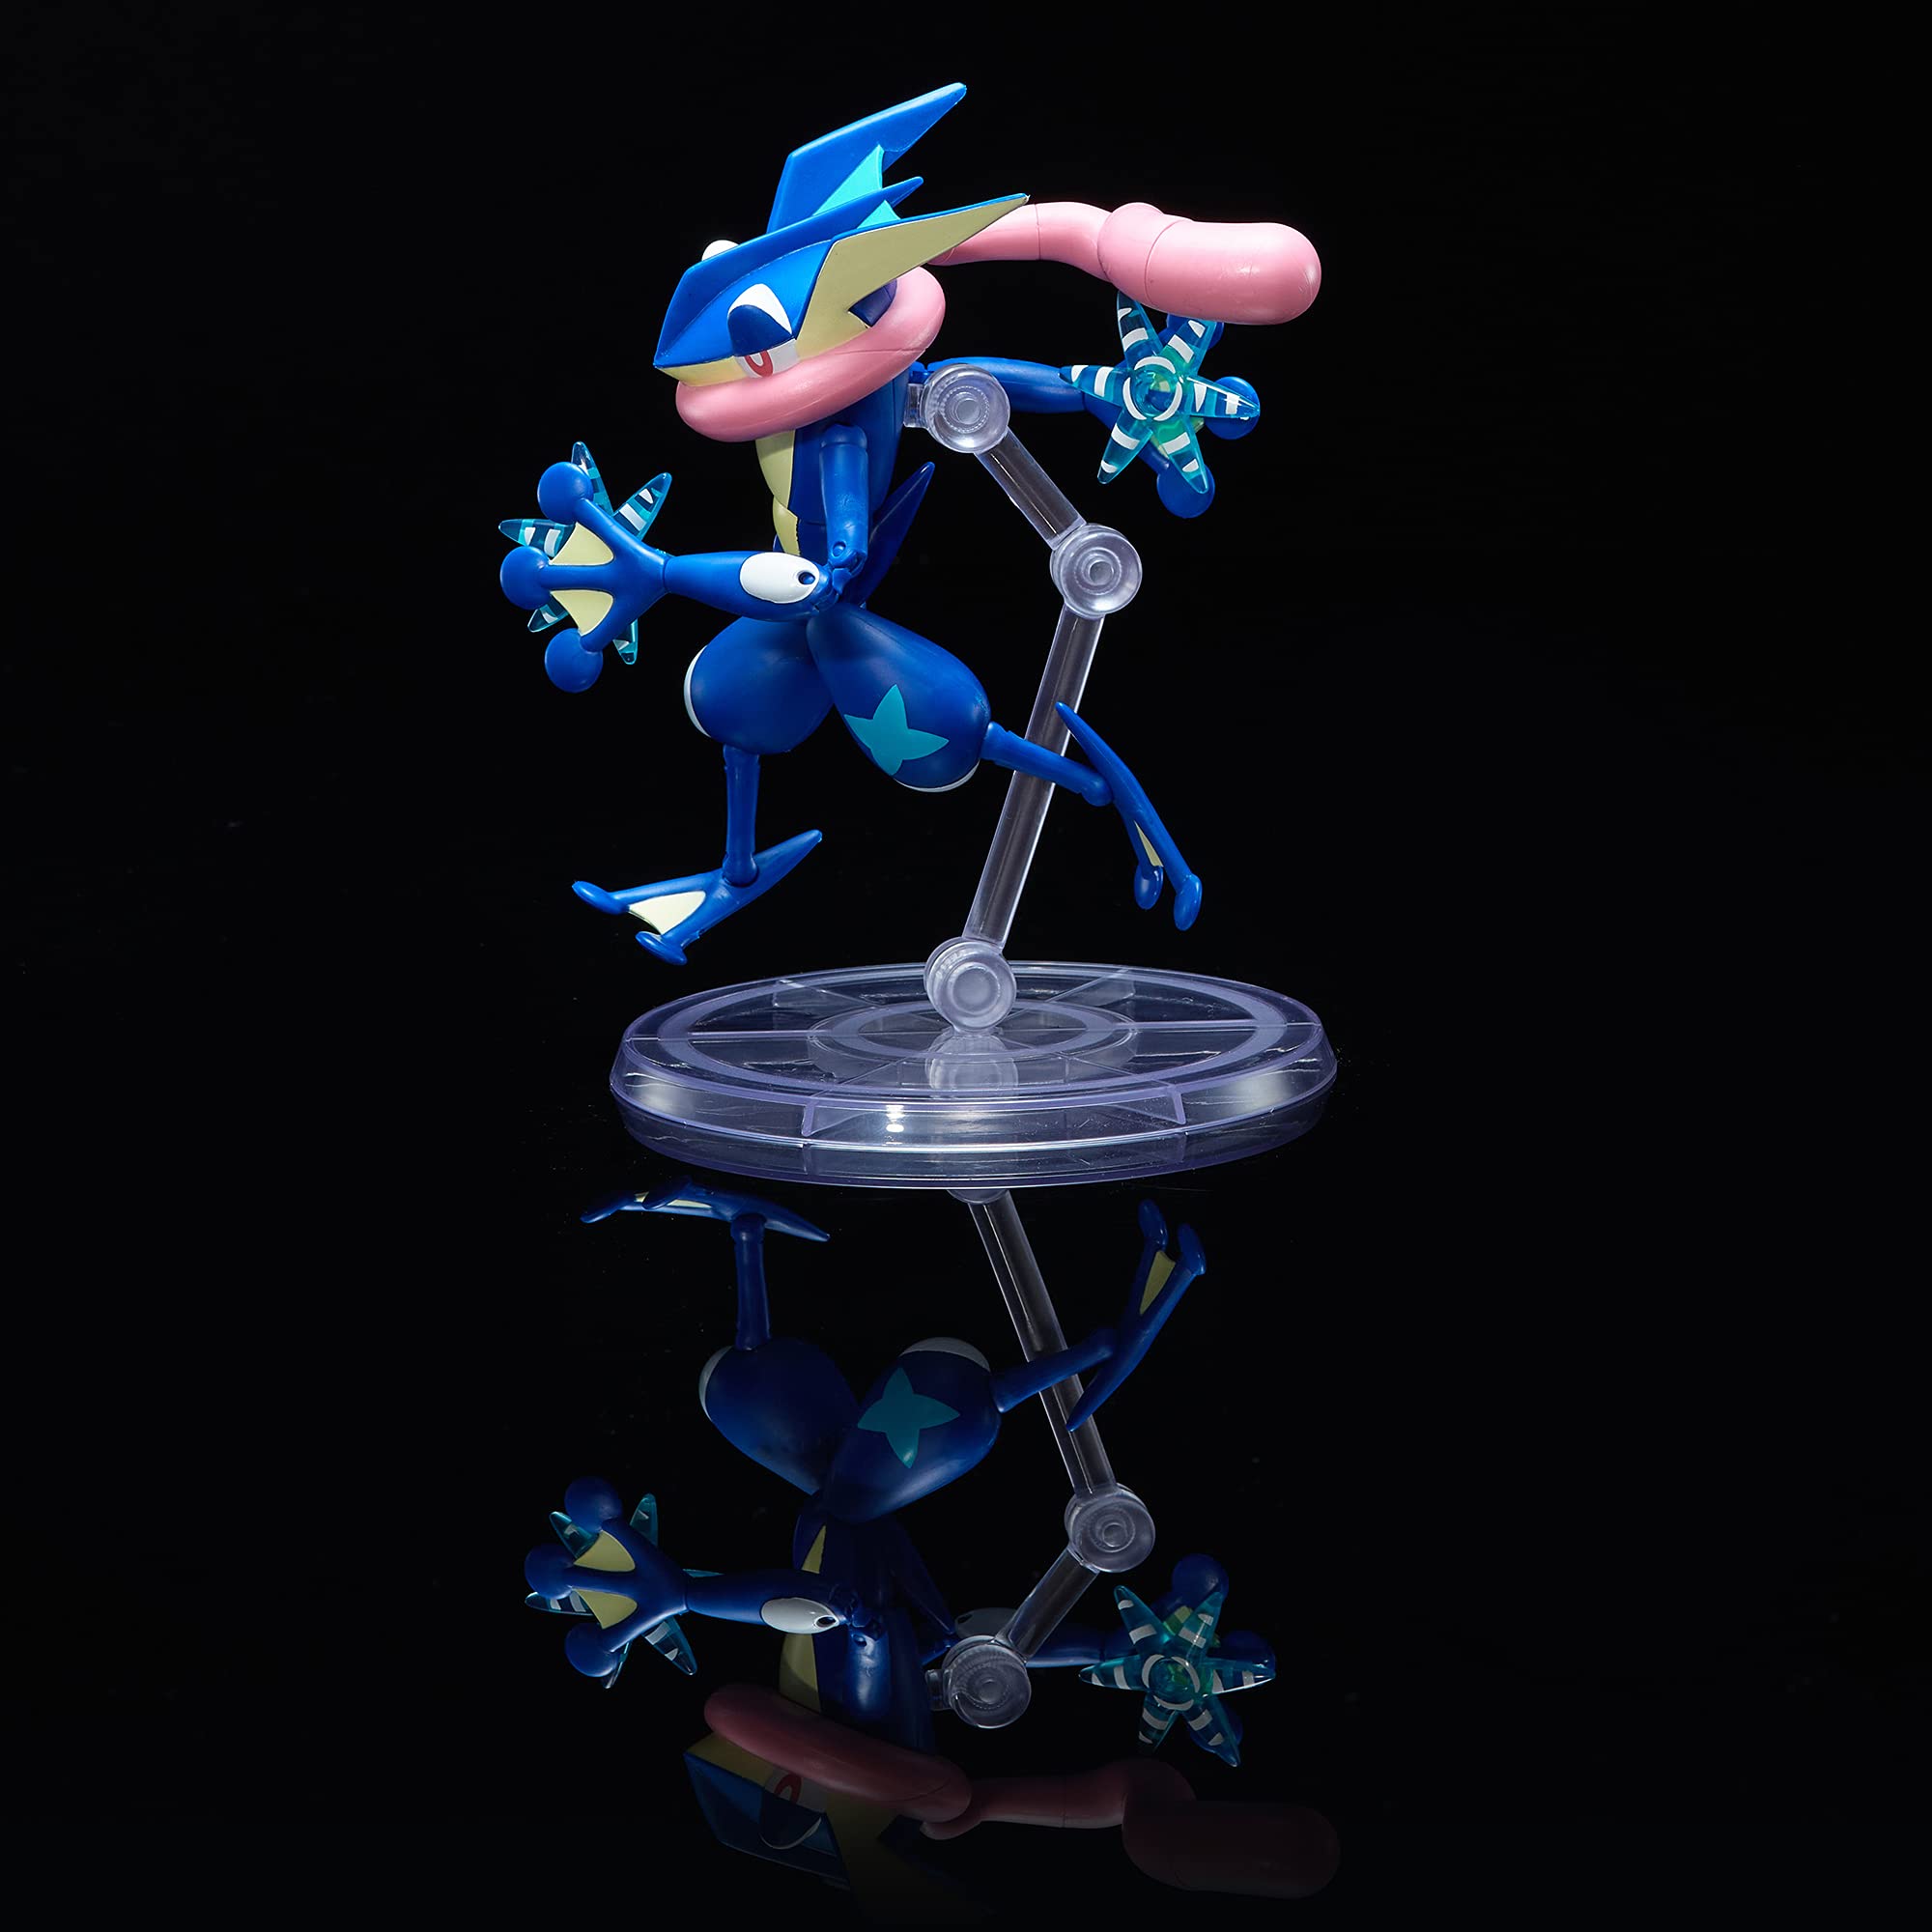 Pokemon Greninja, Super-Articulated 6-Inch Figure - Collect Your Favorite Pokémon Figures - Toys for Kids and Pokémon Fans